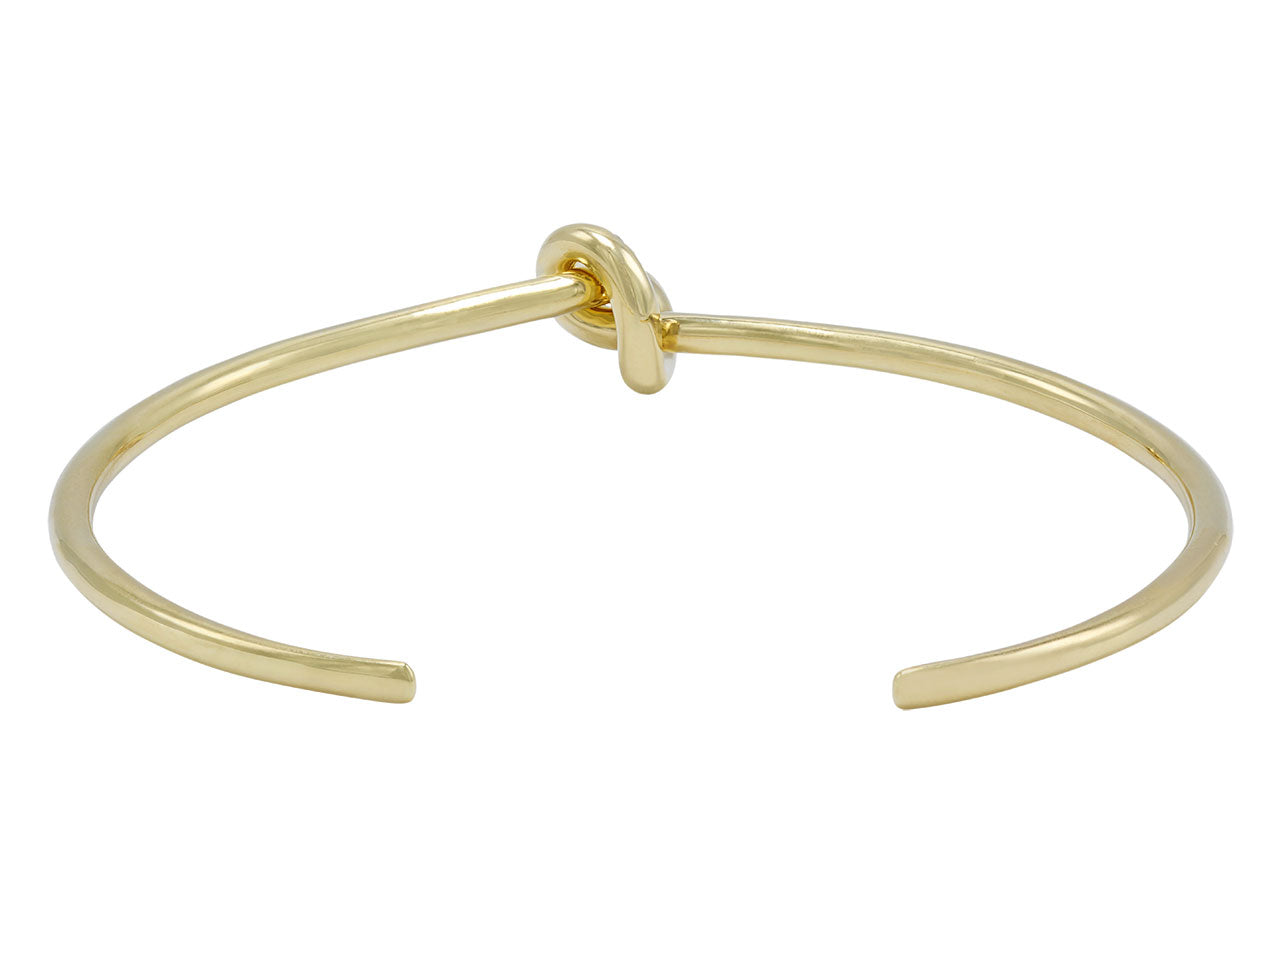 WISTIC Love Knot Bangle Bracelet Gold Silver Plated India | Ubuy